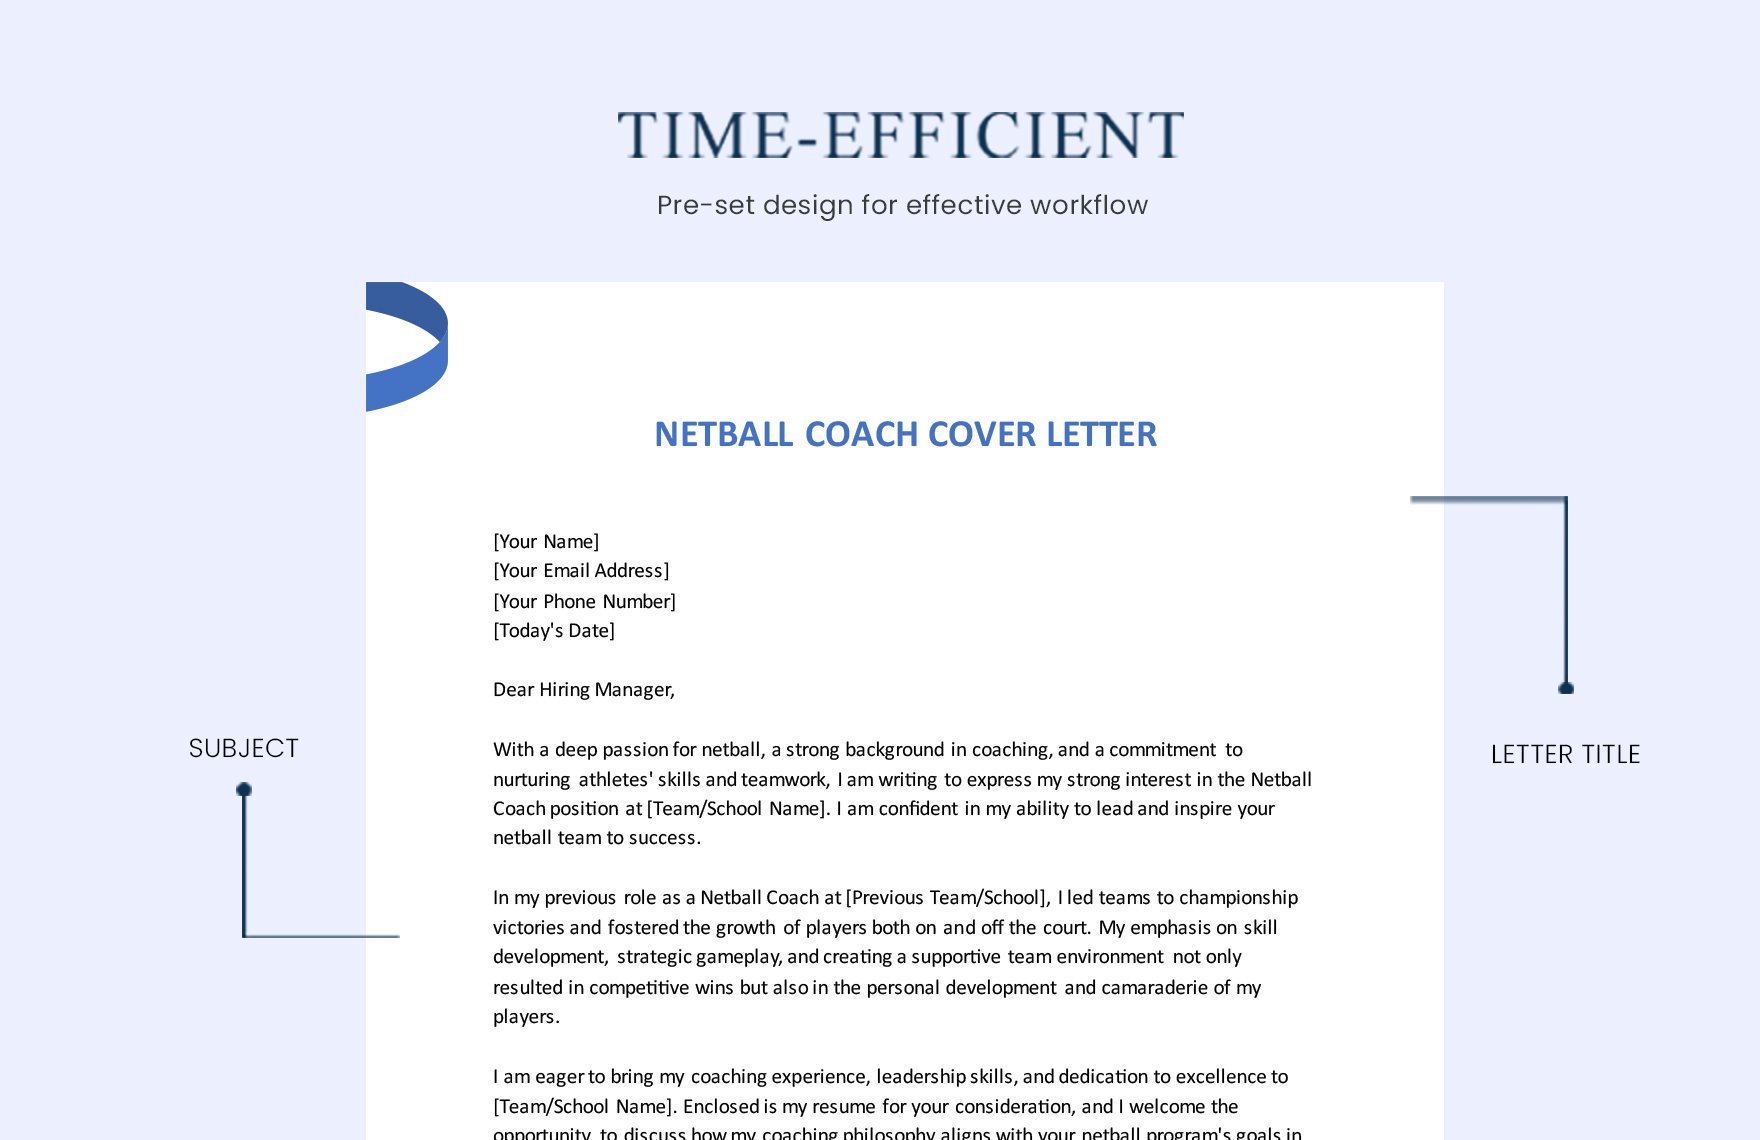 Netball Coach Cover Letter